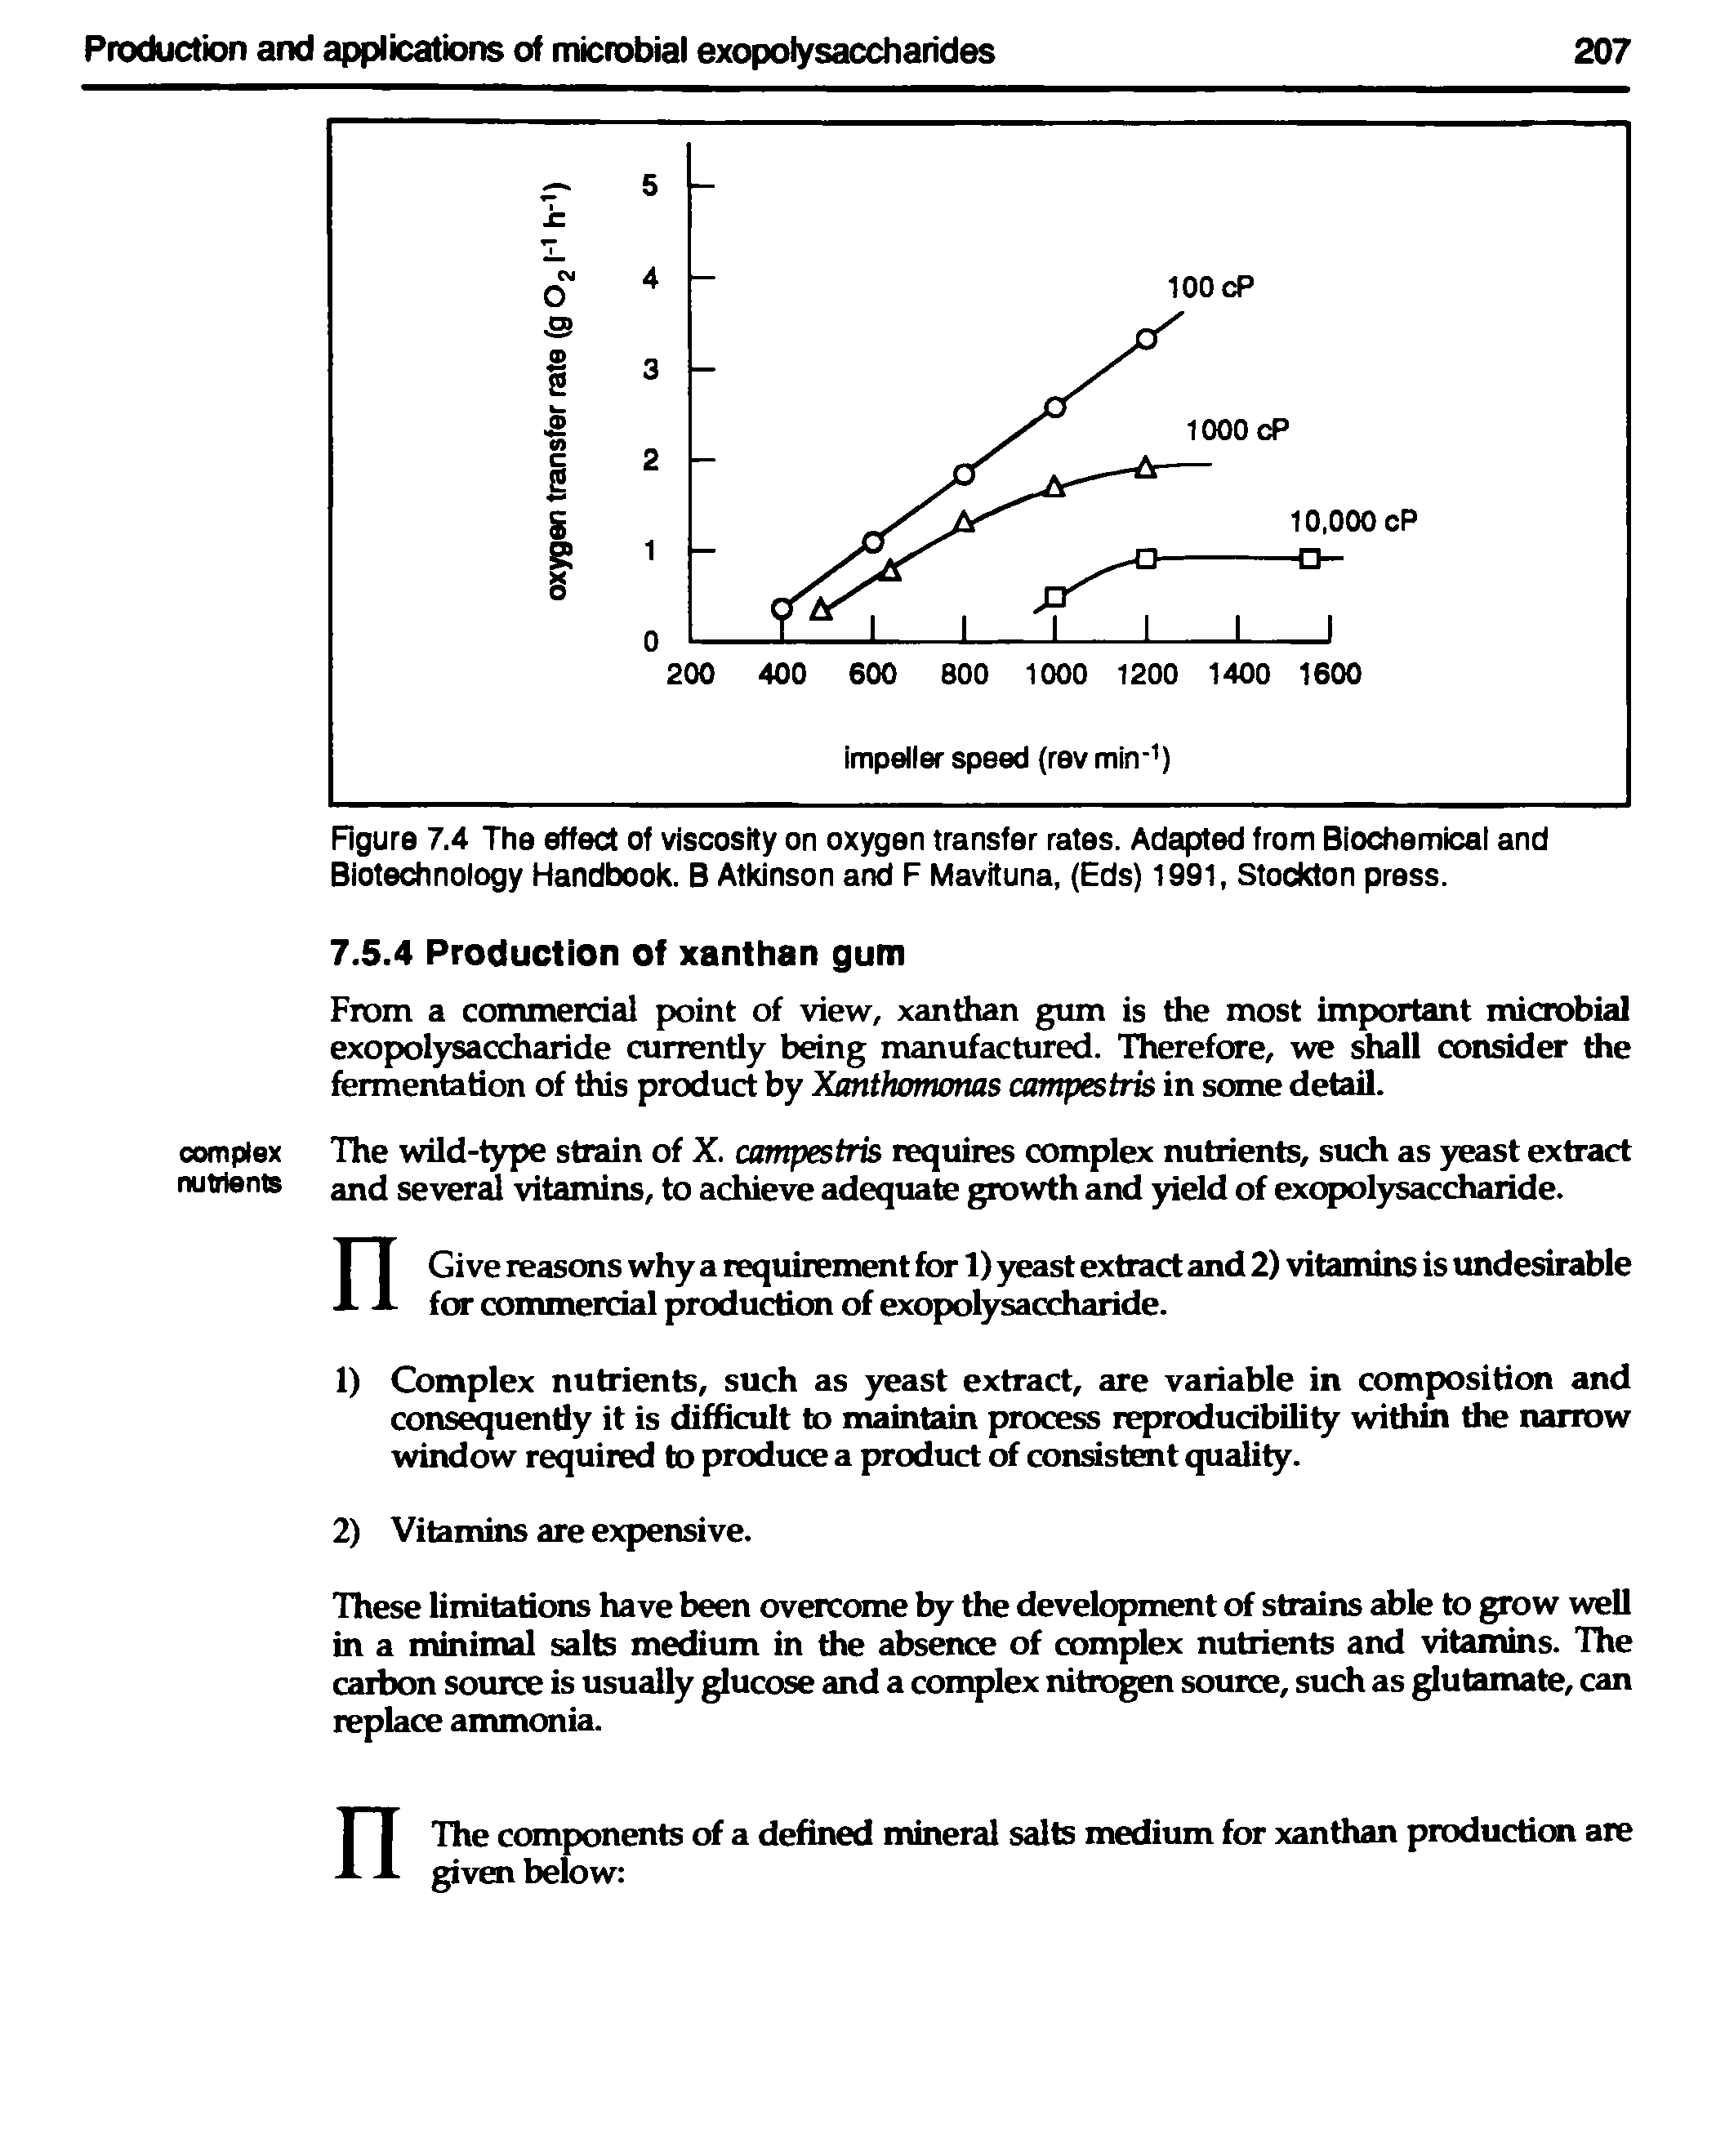 Figure 7.4 The effect of viscosity on oxygen transfer rates. Adapted from Biochemical and Biotechnology Handbook. B Atkinson and F Mavituna, (Eds) 1991, Stockton press.